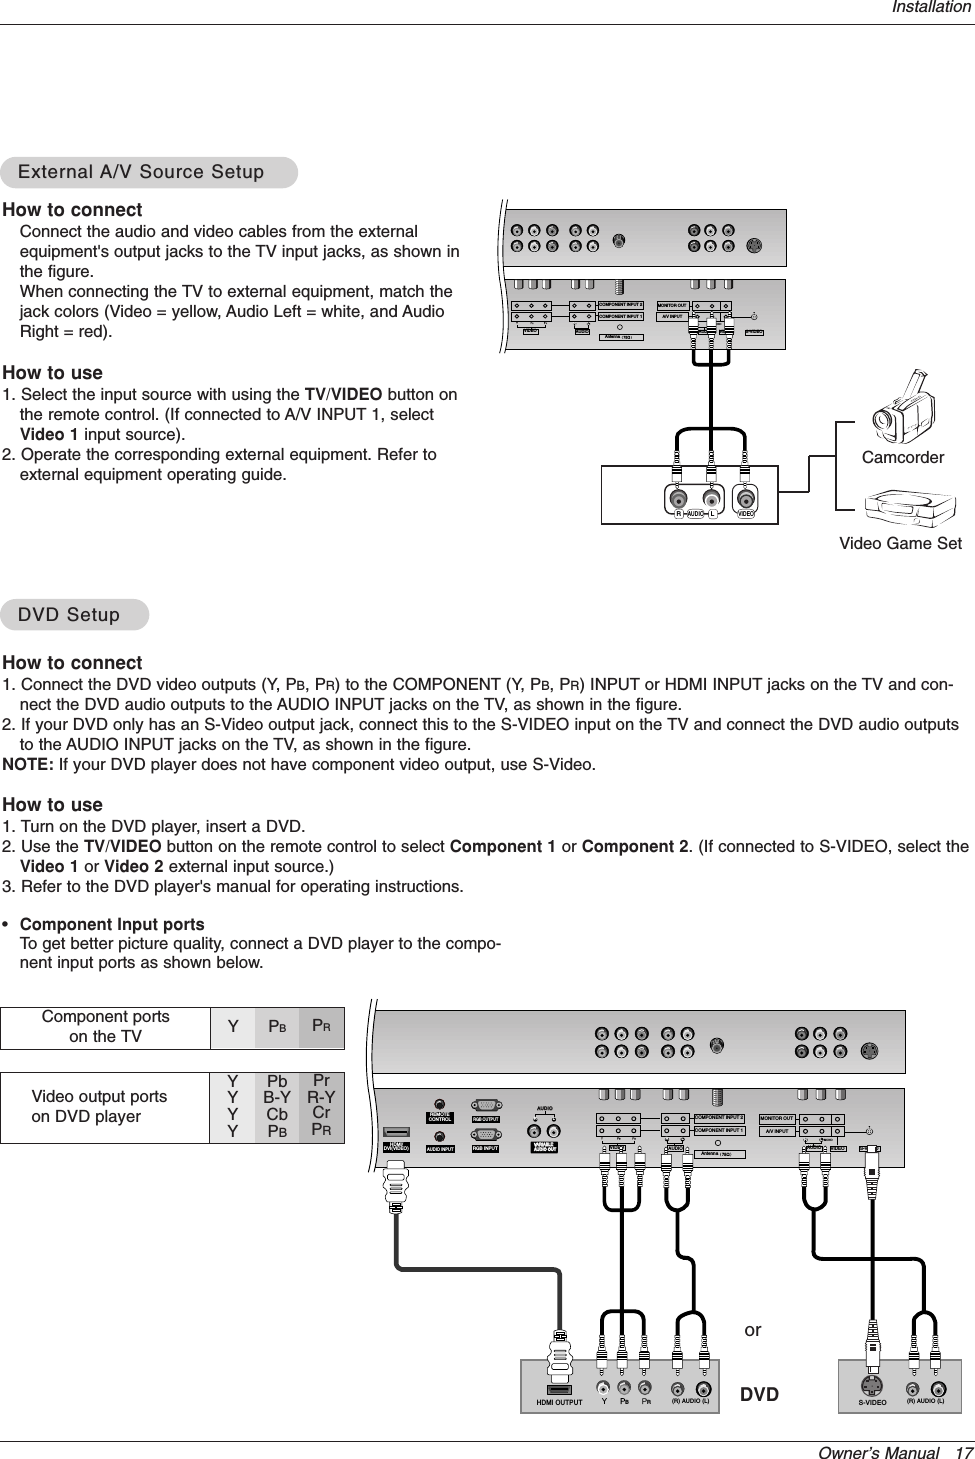 Owner’s Manual   17Installation•Component Input portsTo get better picture quality, connect a DVD player to the compo-nent input ports as shown below.How to connectConnect the audio and video cables from the externalequipment&apos;s output jacks to the TV input jacks, as shown inthe figure. When connecting the TV to external equipment, match thejack colors (Video = yellow, Audio Left = white, and AudioRight = red).How to use1. Select the input source with using the TV/VIDEO button onthe remote control. (If connected to A/V INPUT 1, selectVideo 1 input source).2. Operate the corresponding external equipment. Refer toexternal equipment operating guide.Component ports on the TV Y PBPRVideo output ports on DVD playerYYYYPbB-YCbPBPrR-YCrPRHow to connect1. Connect the DVD video outputs (Y, PB, PR) to the COMPONENT (Y, PB, PR) INPUT or HDMI INPUT jacks on the TV and con-nect the DVD audio outputs to the AUDIO INPUT jacks on the TV, as shown in the figure.2. If your DVD only has an S-Video output jack, connect this to the S-VIDEO input on the TV and connect the DVD audio outputsto the AUDIO INPUT jacks on the TV, as shown in the figure.NOTE: If your DVD player does not have component video output, use S-Video.How to use1. Turn on the DVD player, insert a DVD.2. Use the TV/VIDEO button on the remote control to select Component 1 or Component 2. (If connected to S-VIDEO, select theVideo 1 or Video 2 external input source.)3. Refer to the DVD player&apos;s manual for operating instructions.External External A/V Source SetupA/V Source SetupDVD SetupDVD SetupAUDIO VARIABLE AUDIO OUTAntennaS-VIDEOCOMPONENT INPUT 2COMPONENT INPUT 1AUDIOVIDEORLAUDIO VIDEORMONITOR OUTA/V INPUTLMONORLAUDIO VIDEOAUDIO AUDIO LR REMOTECONTROLAUDIO INPUTRGB INPUTVARIABLE ARIABLE AUDIO OUTAUDIO OUT     HDMI/DVI(VIDEO)RGB OUTPUTAntennaS-VIDEOCOMPONENT INPUT 2COMPONENT INPUT 1AUDIOVIDEORLAUDIO VIDEORMONITOR OUTA/V INPUTLMONOBR(R) AUDIO (L) (R) AUDIO (L)S-VIDEOHDMI OUTPUTDVDorCamcorderVideo Game Set